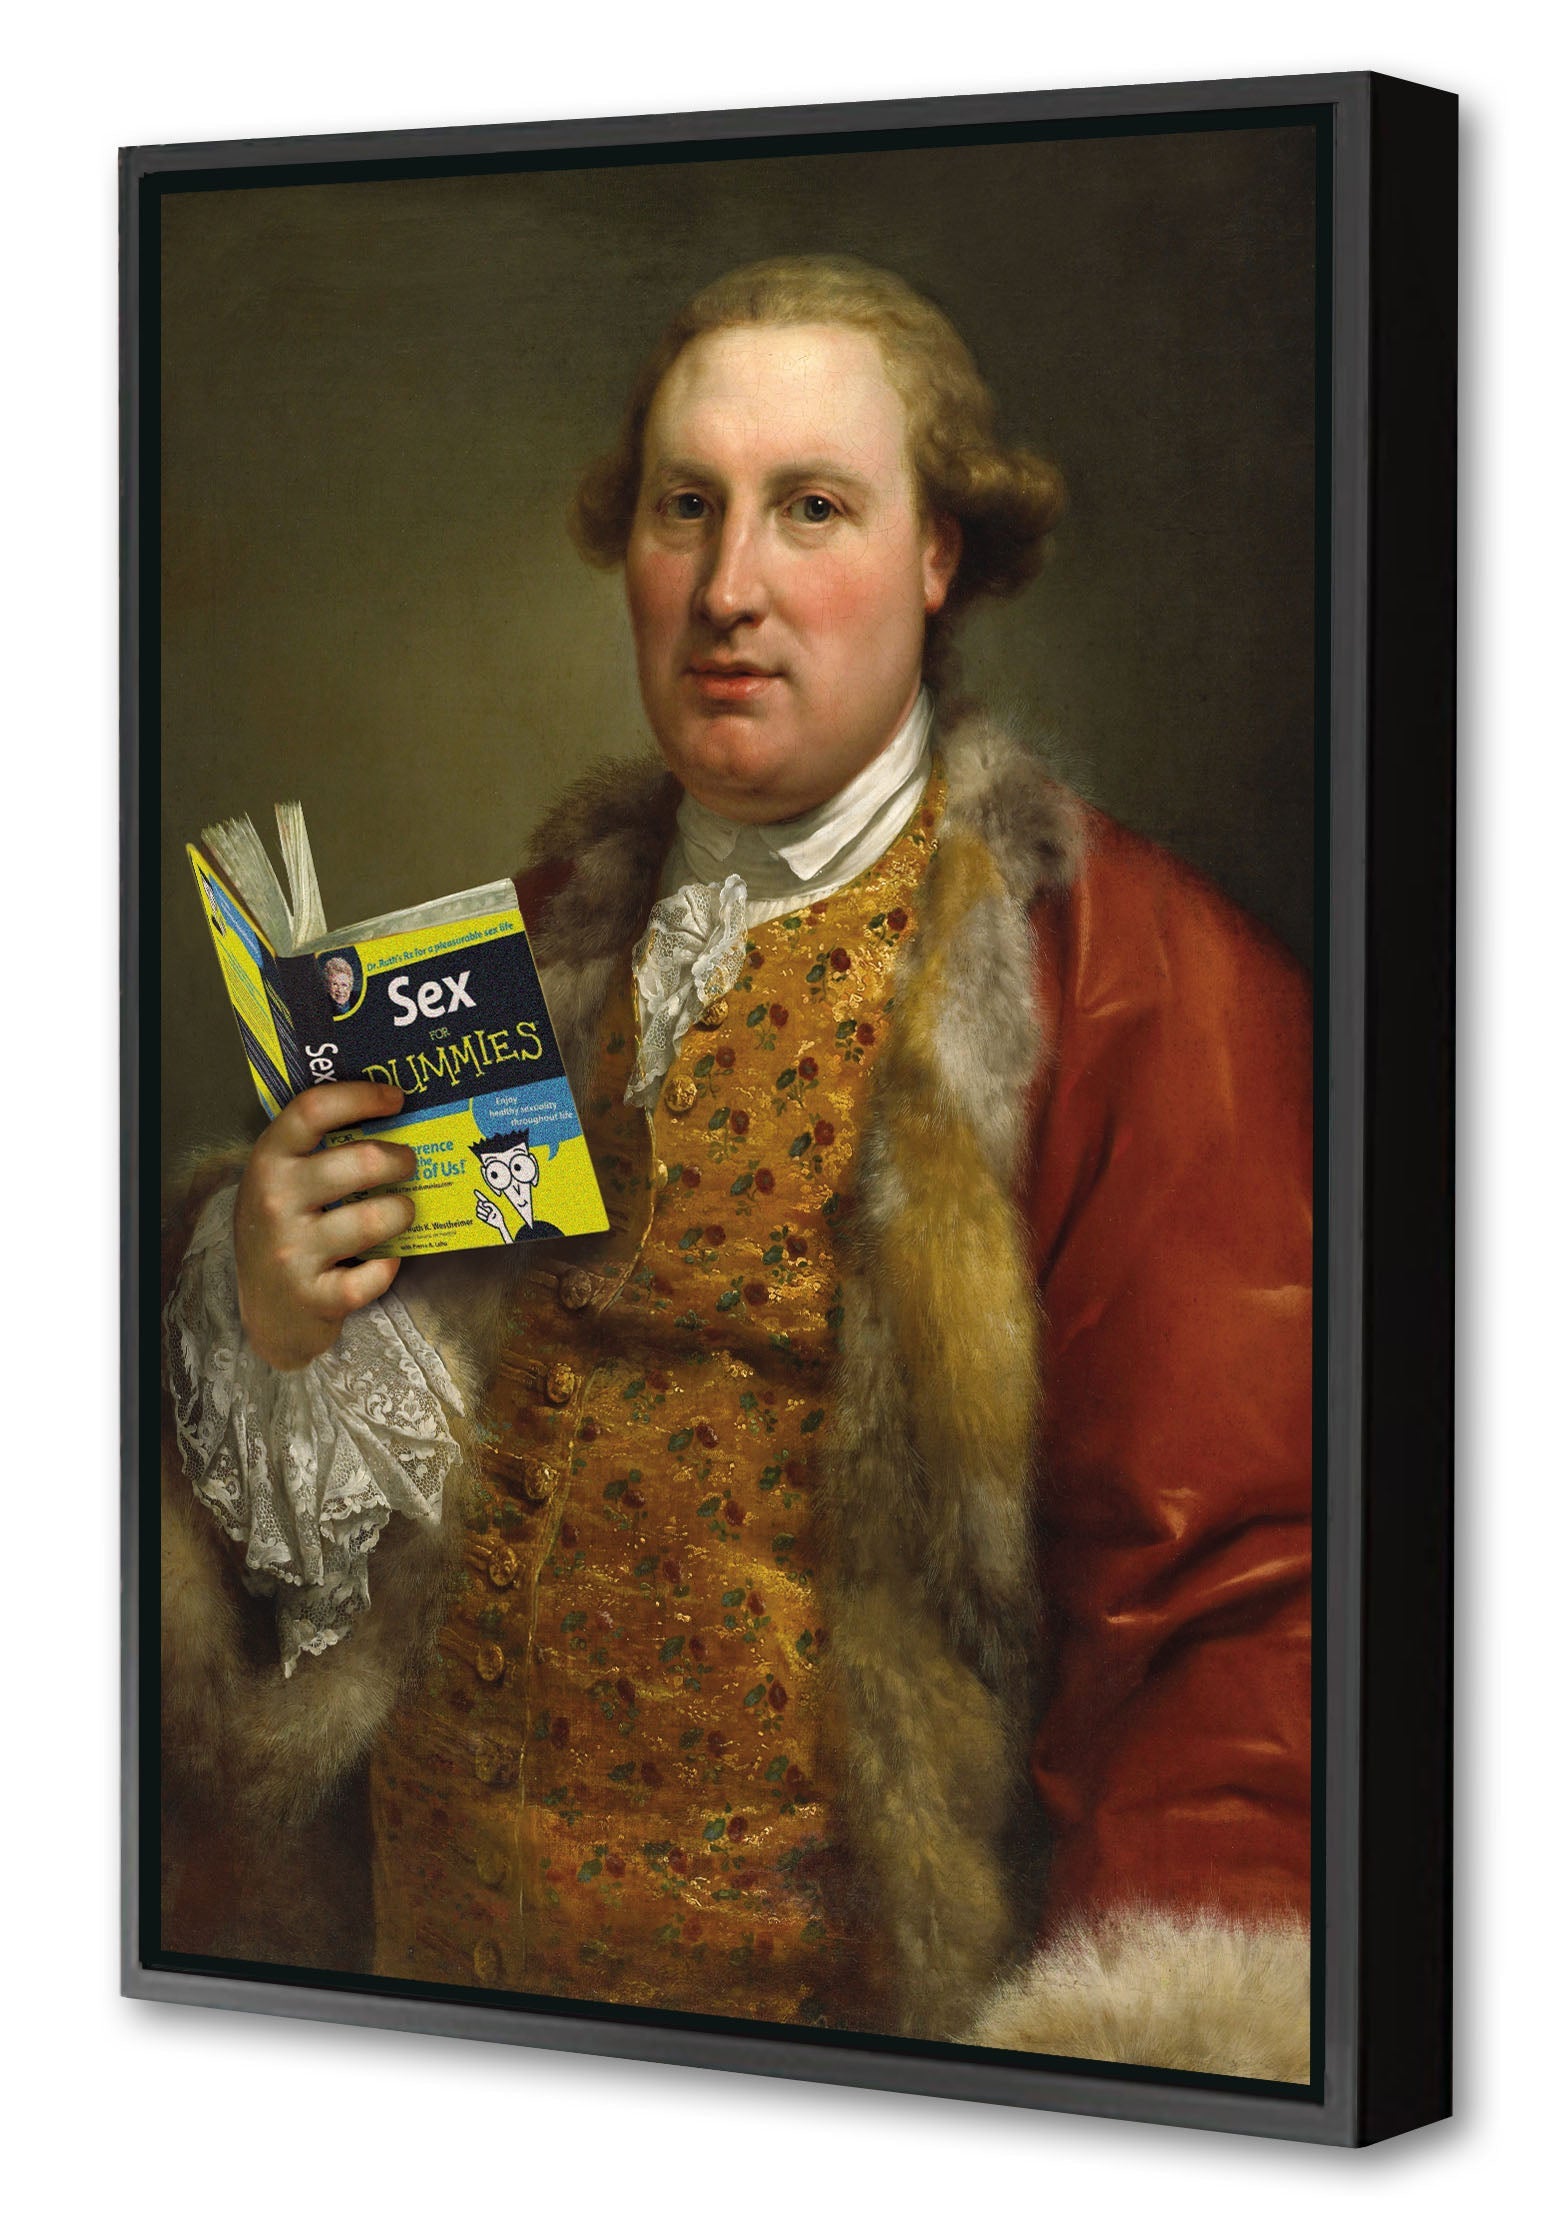 Sex For Dummies-historical, print-Canvas Print with Box Frame-40 x 60 cm-BLUE SHAKER